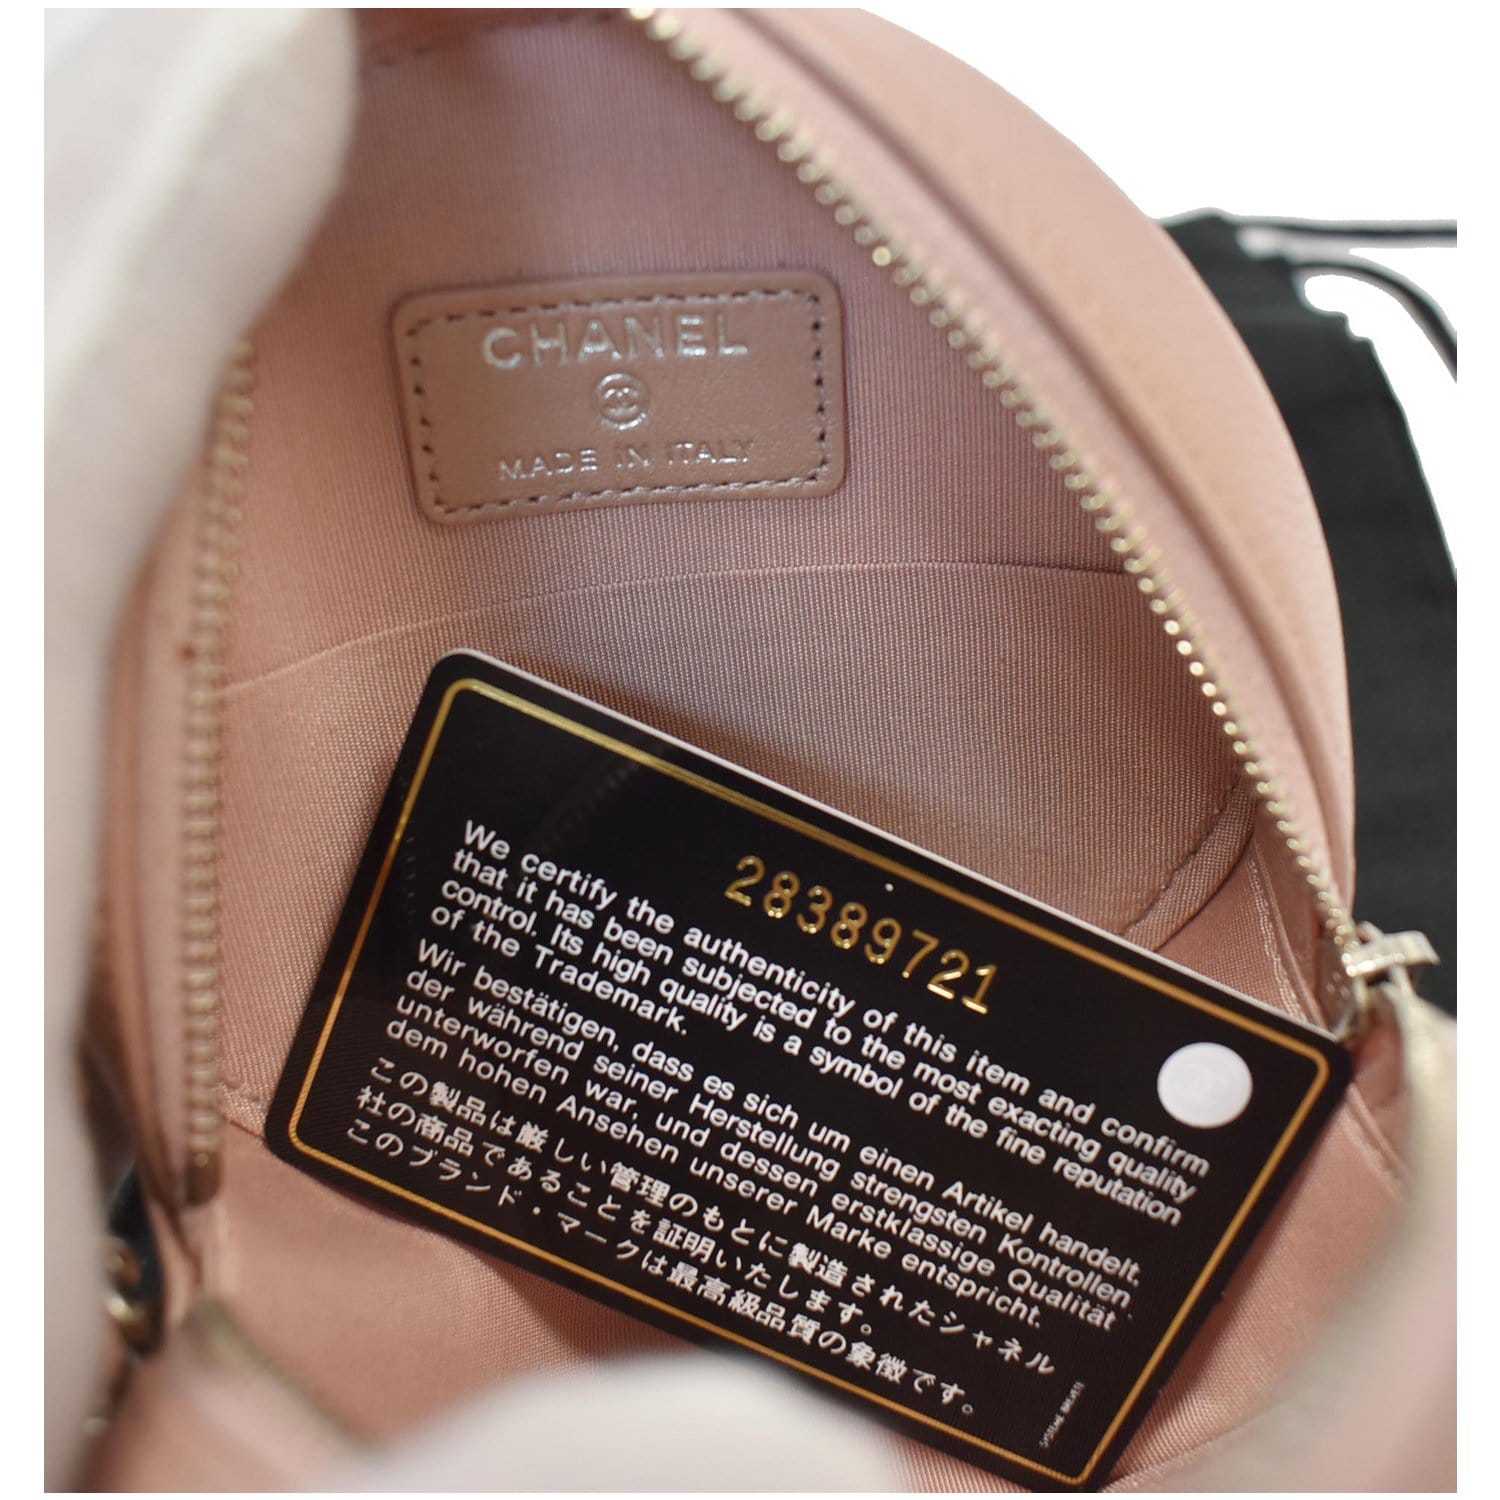 Chanel Camellia Round Leather Crossbody Bag Light Pink-DDH